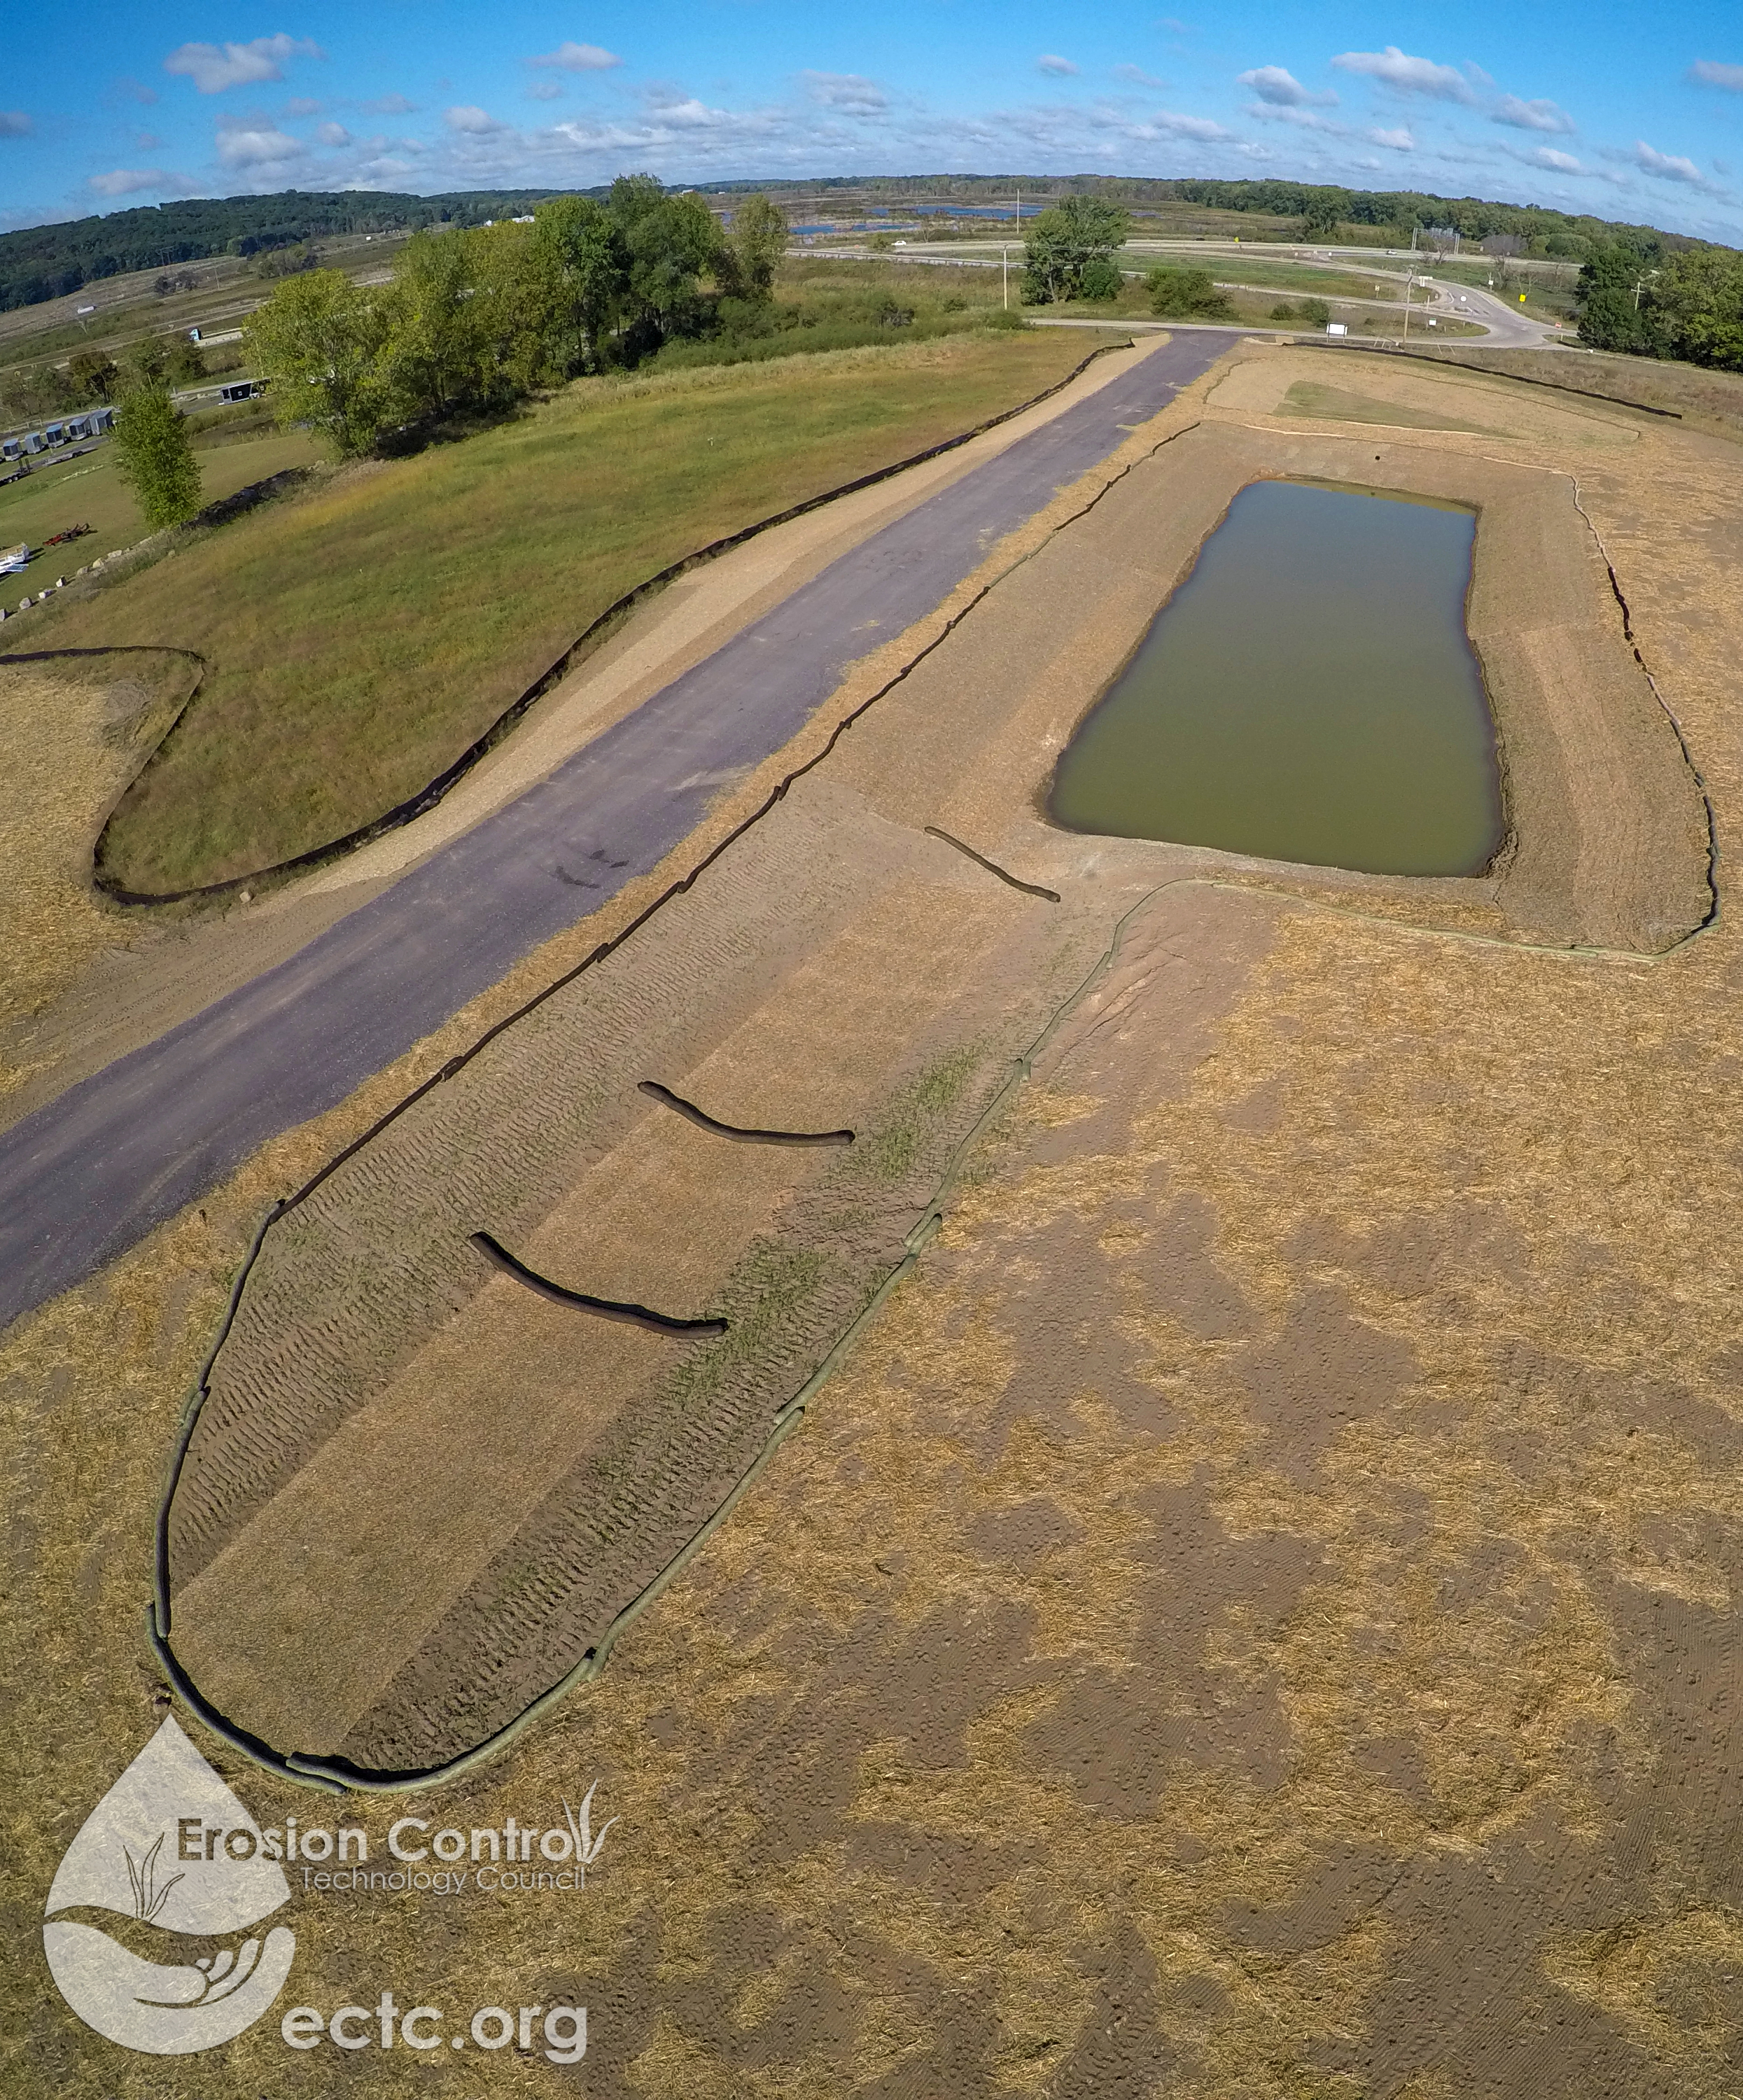 Many erosion control projects call for multiple applications. Can you guess which were used in this installation?